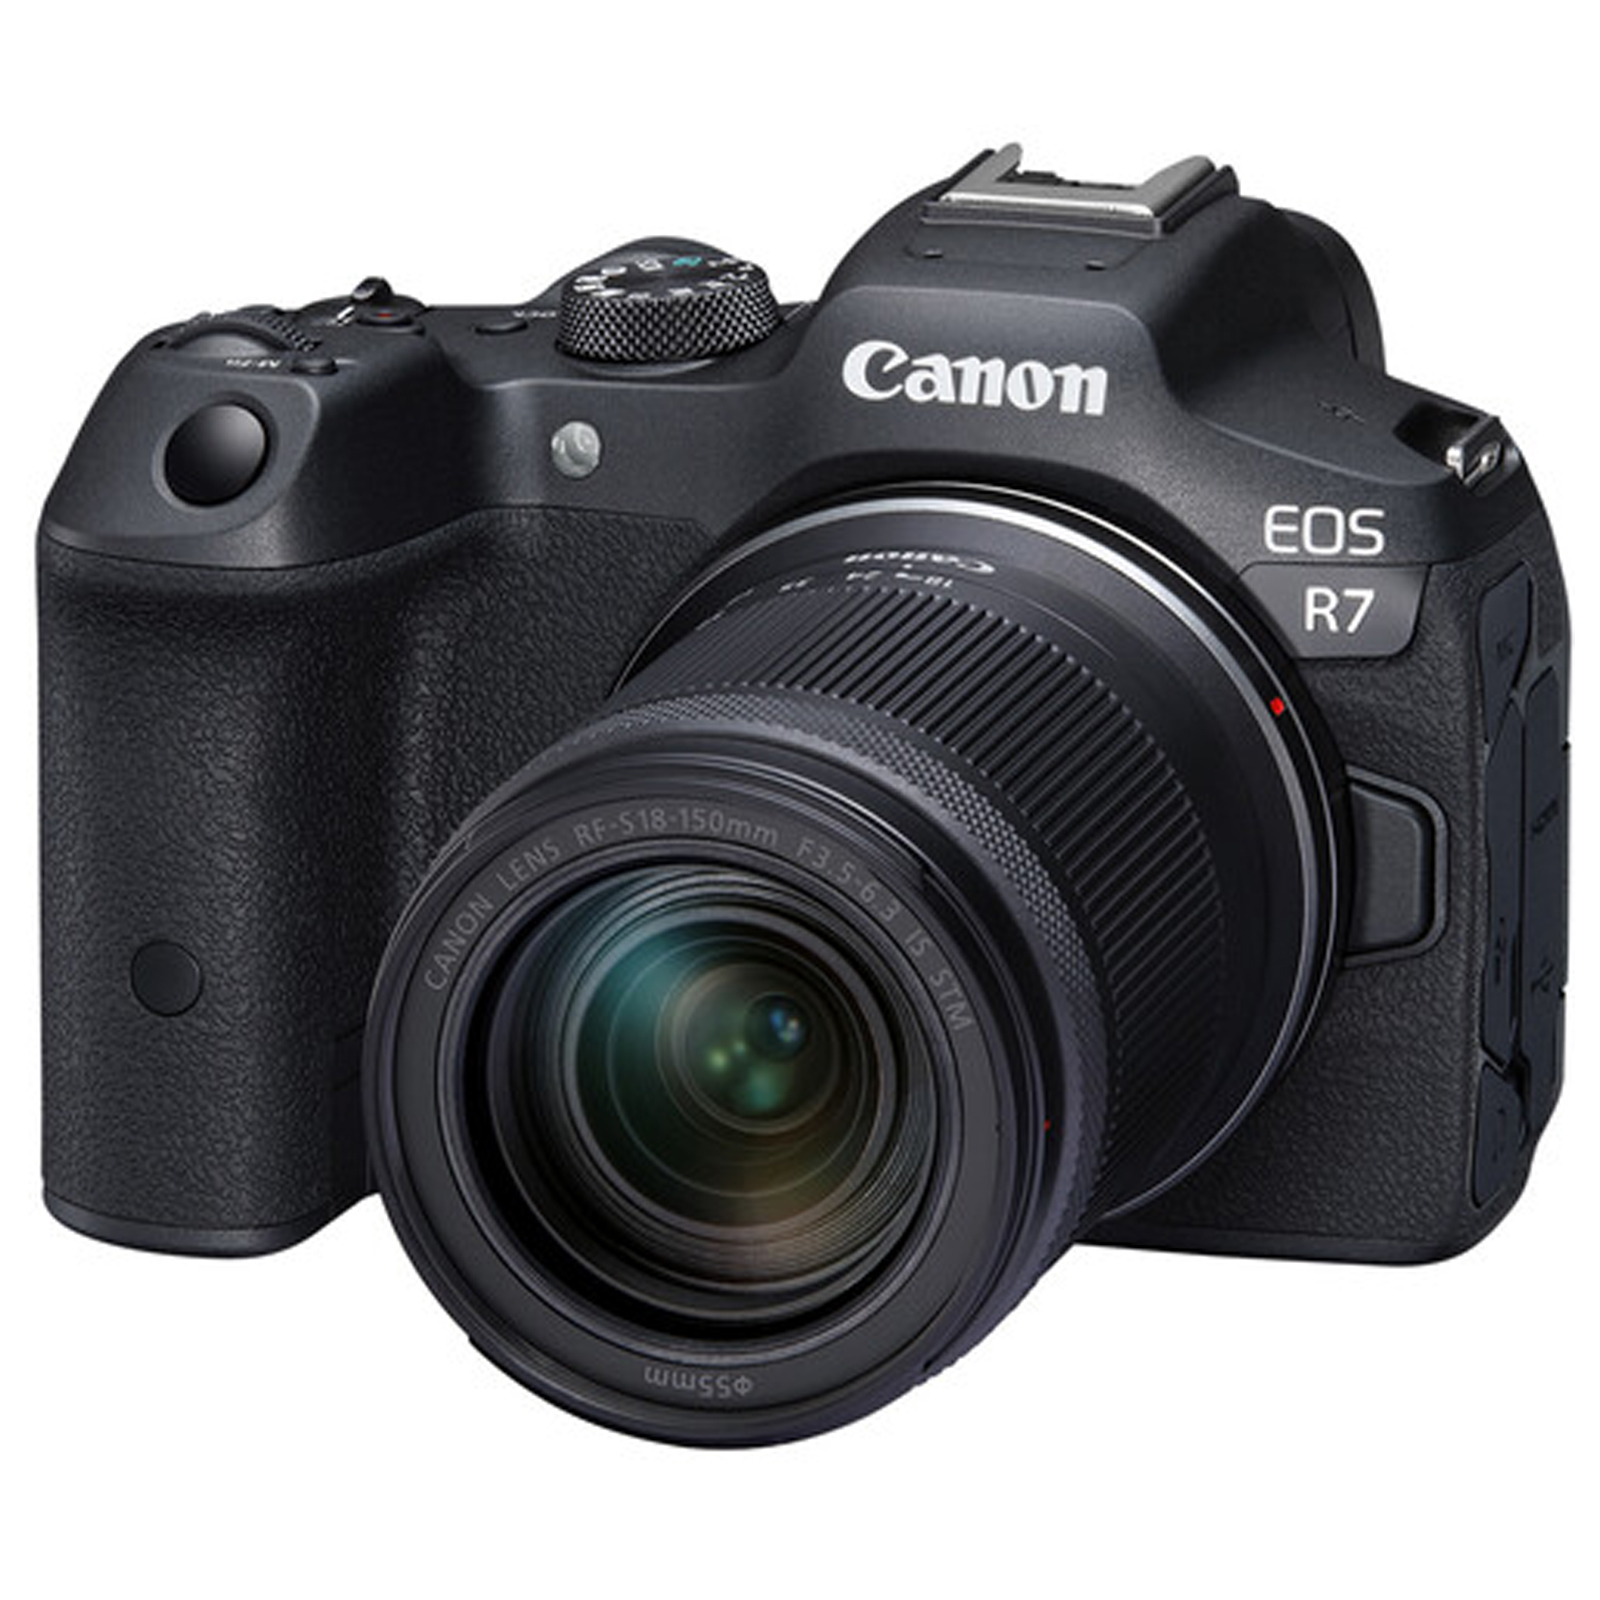 Image of Canon EOS R7 Digital Camera with 18150mm Lens